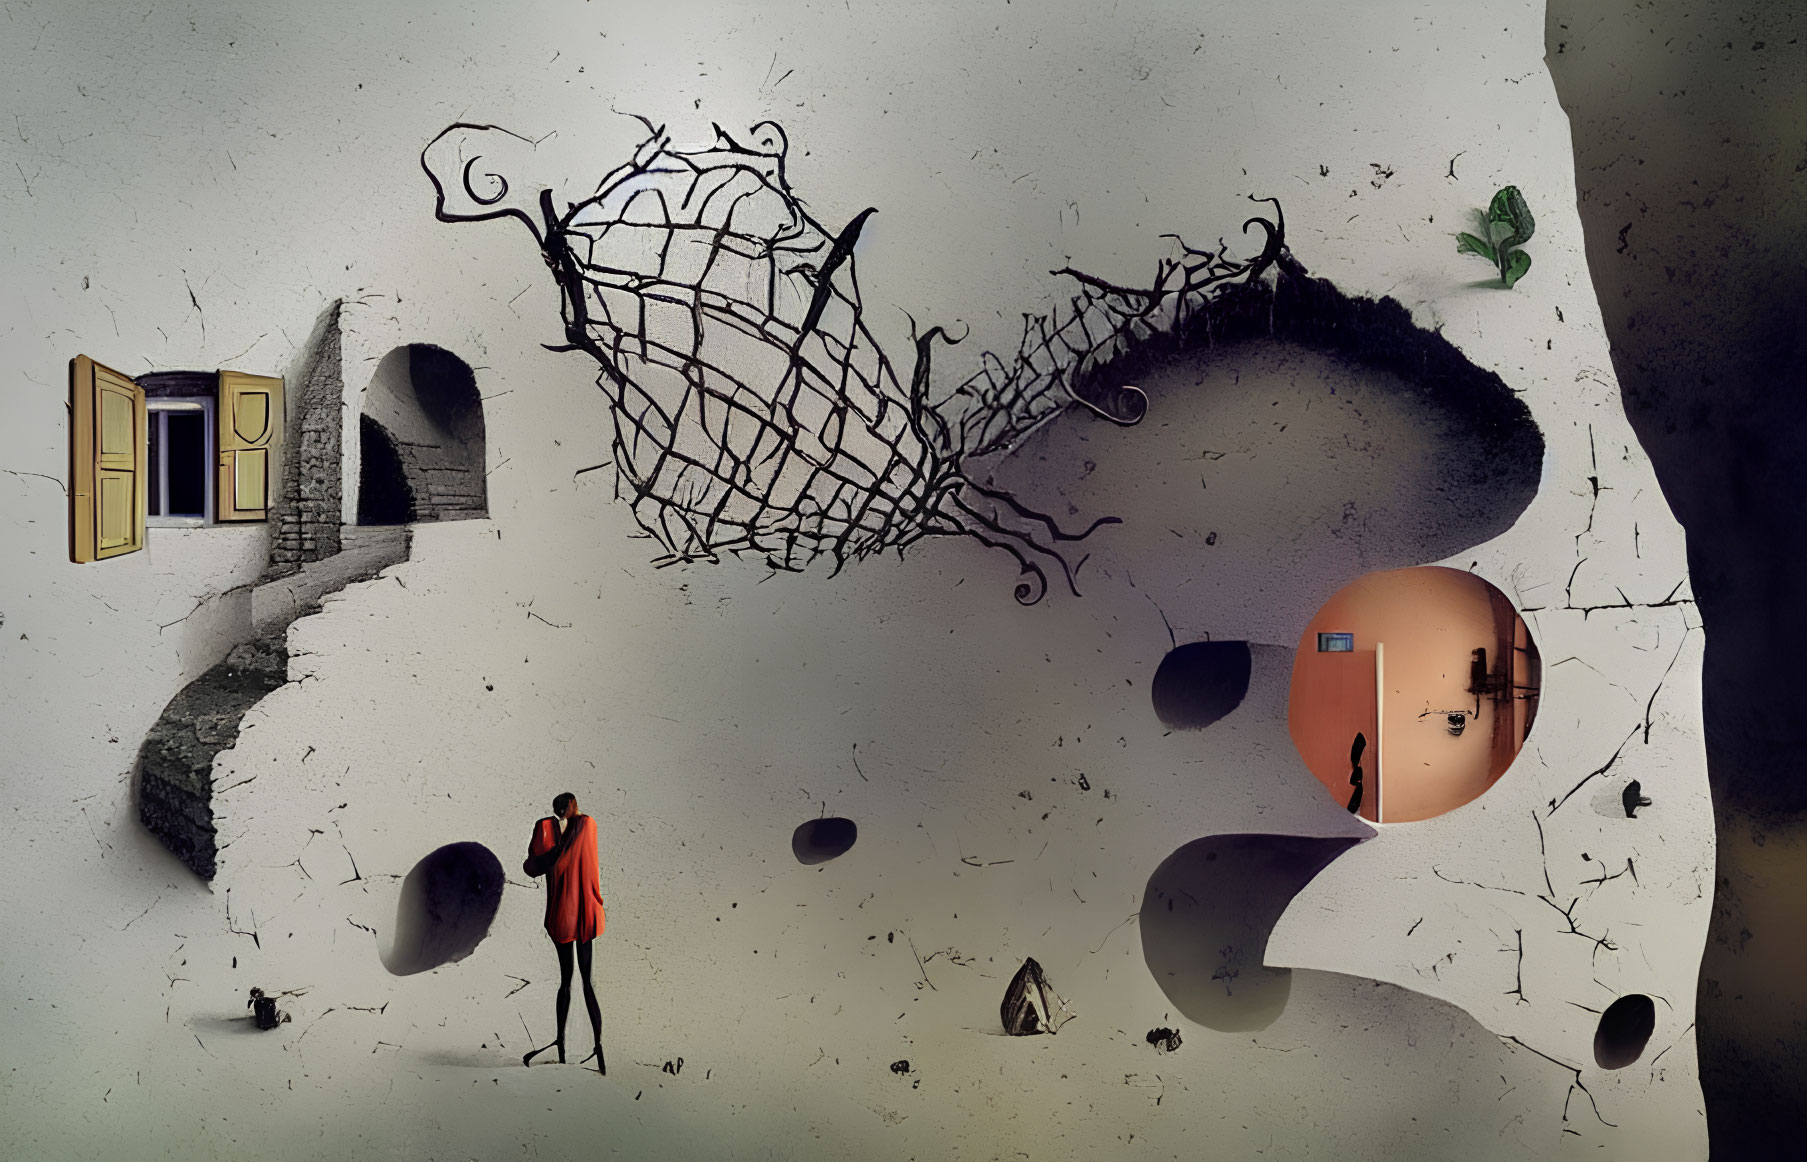 Surreal artwork featuring person in red coat and floating elements on grey background